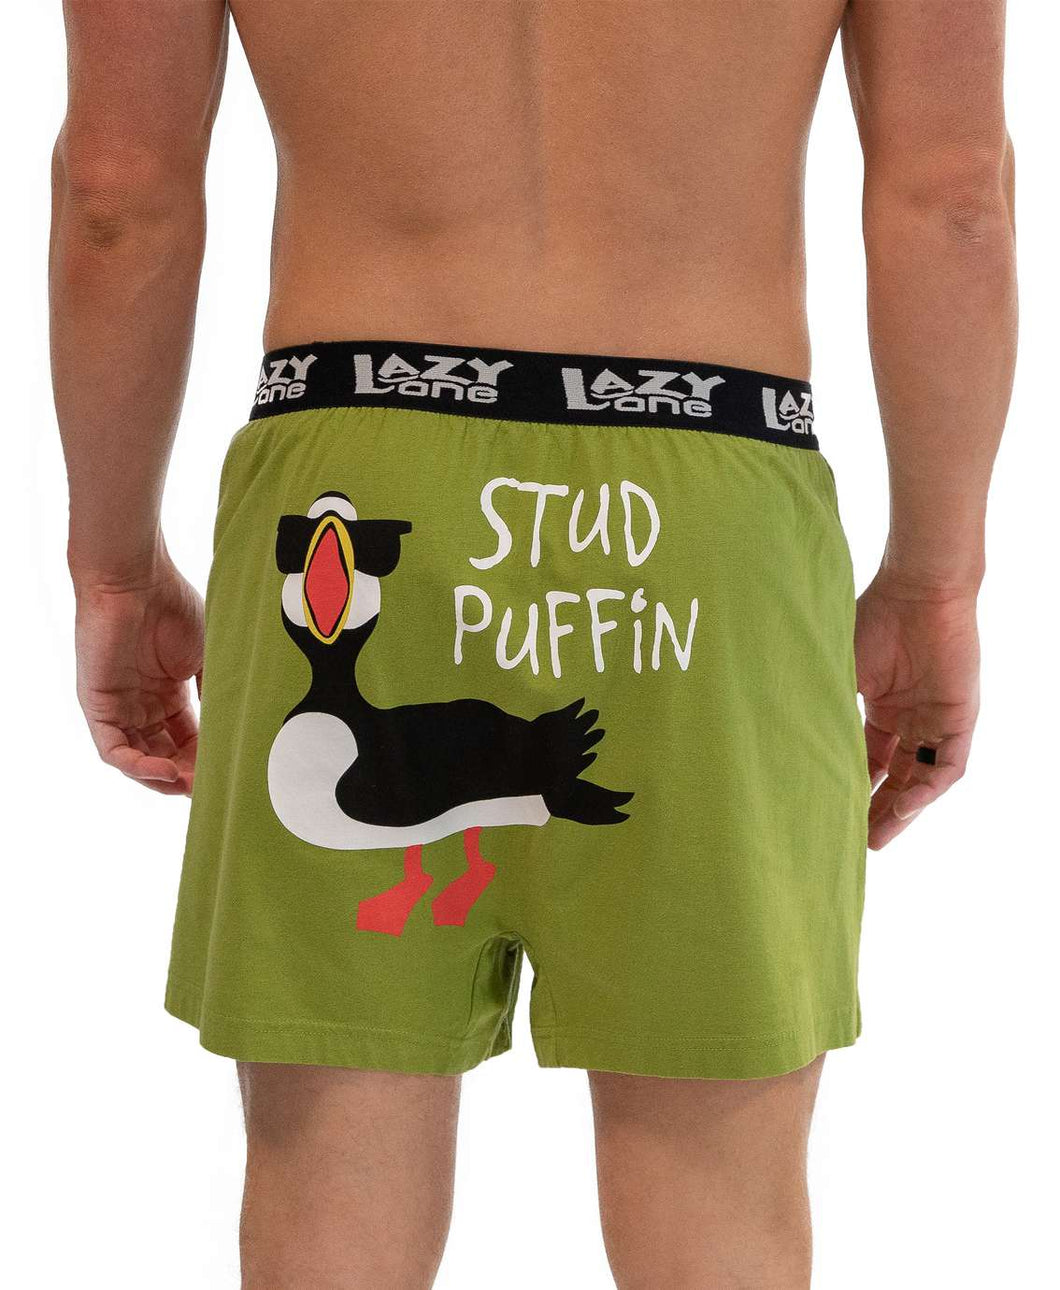 'Lazy One' Men's Stud Puffin Boxer - Green